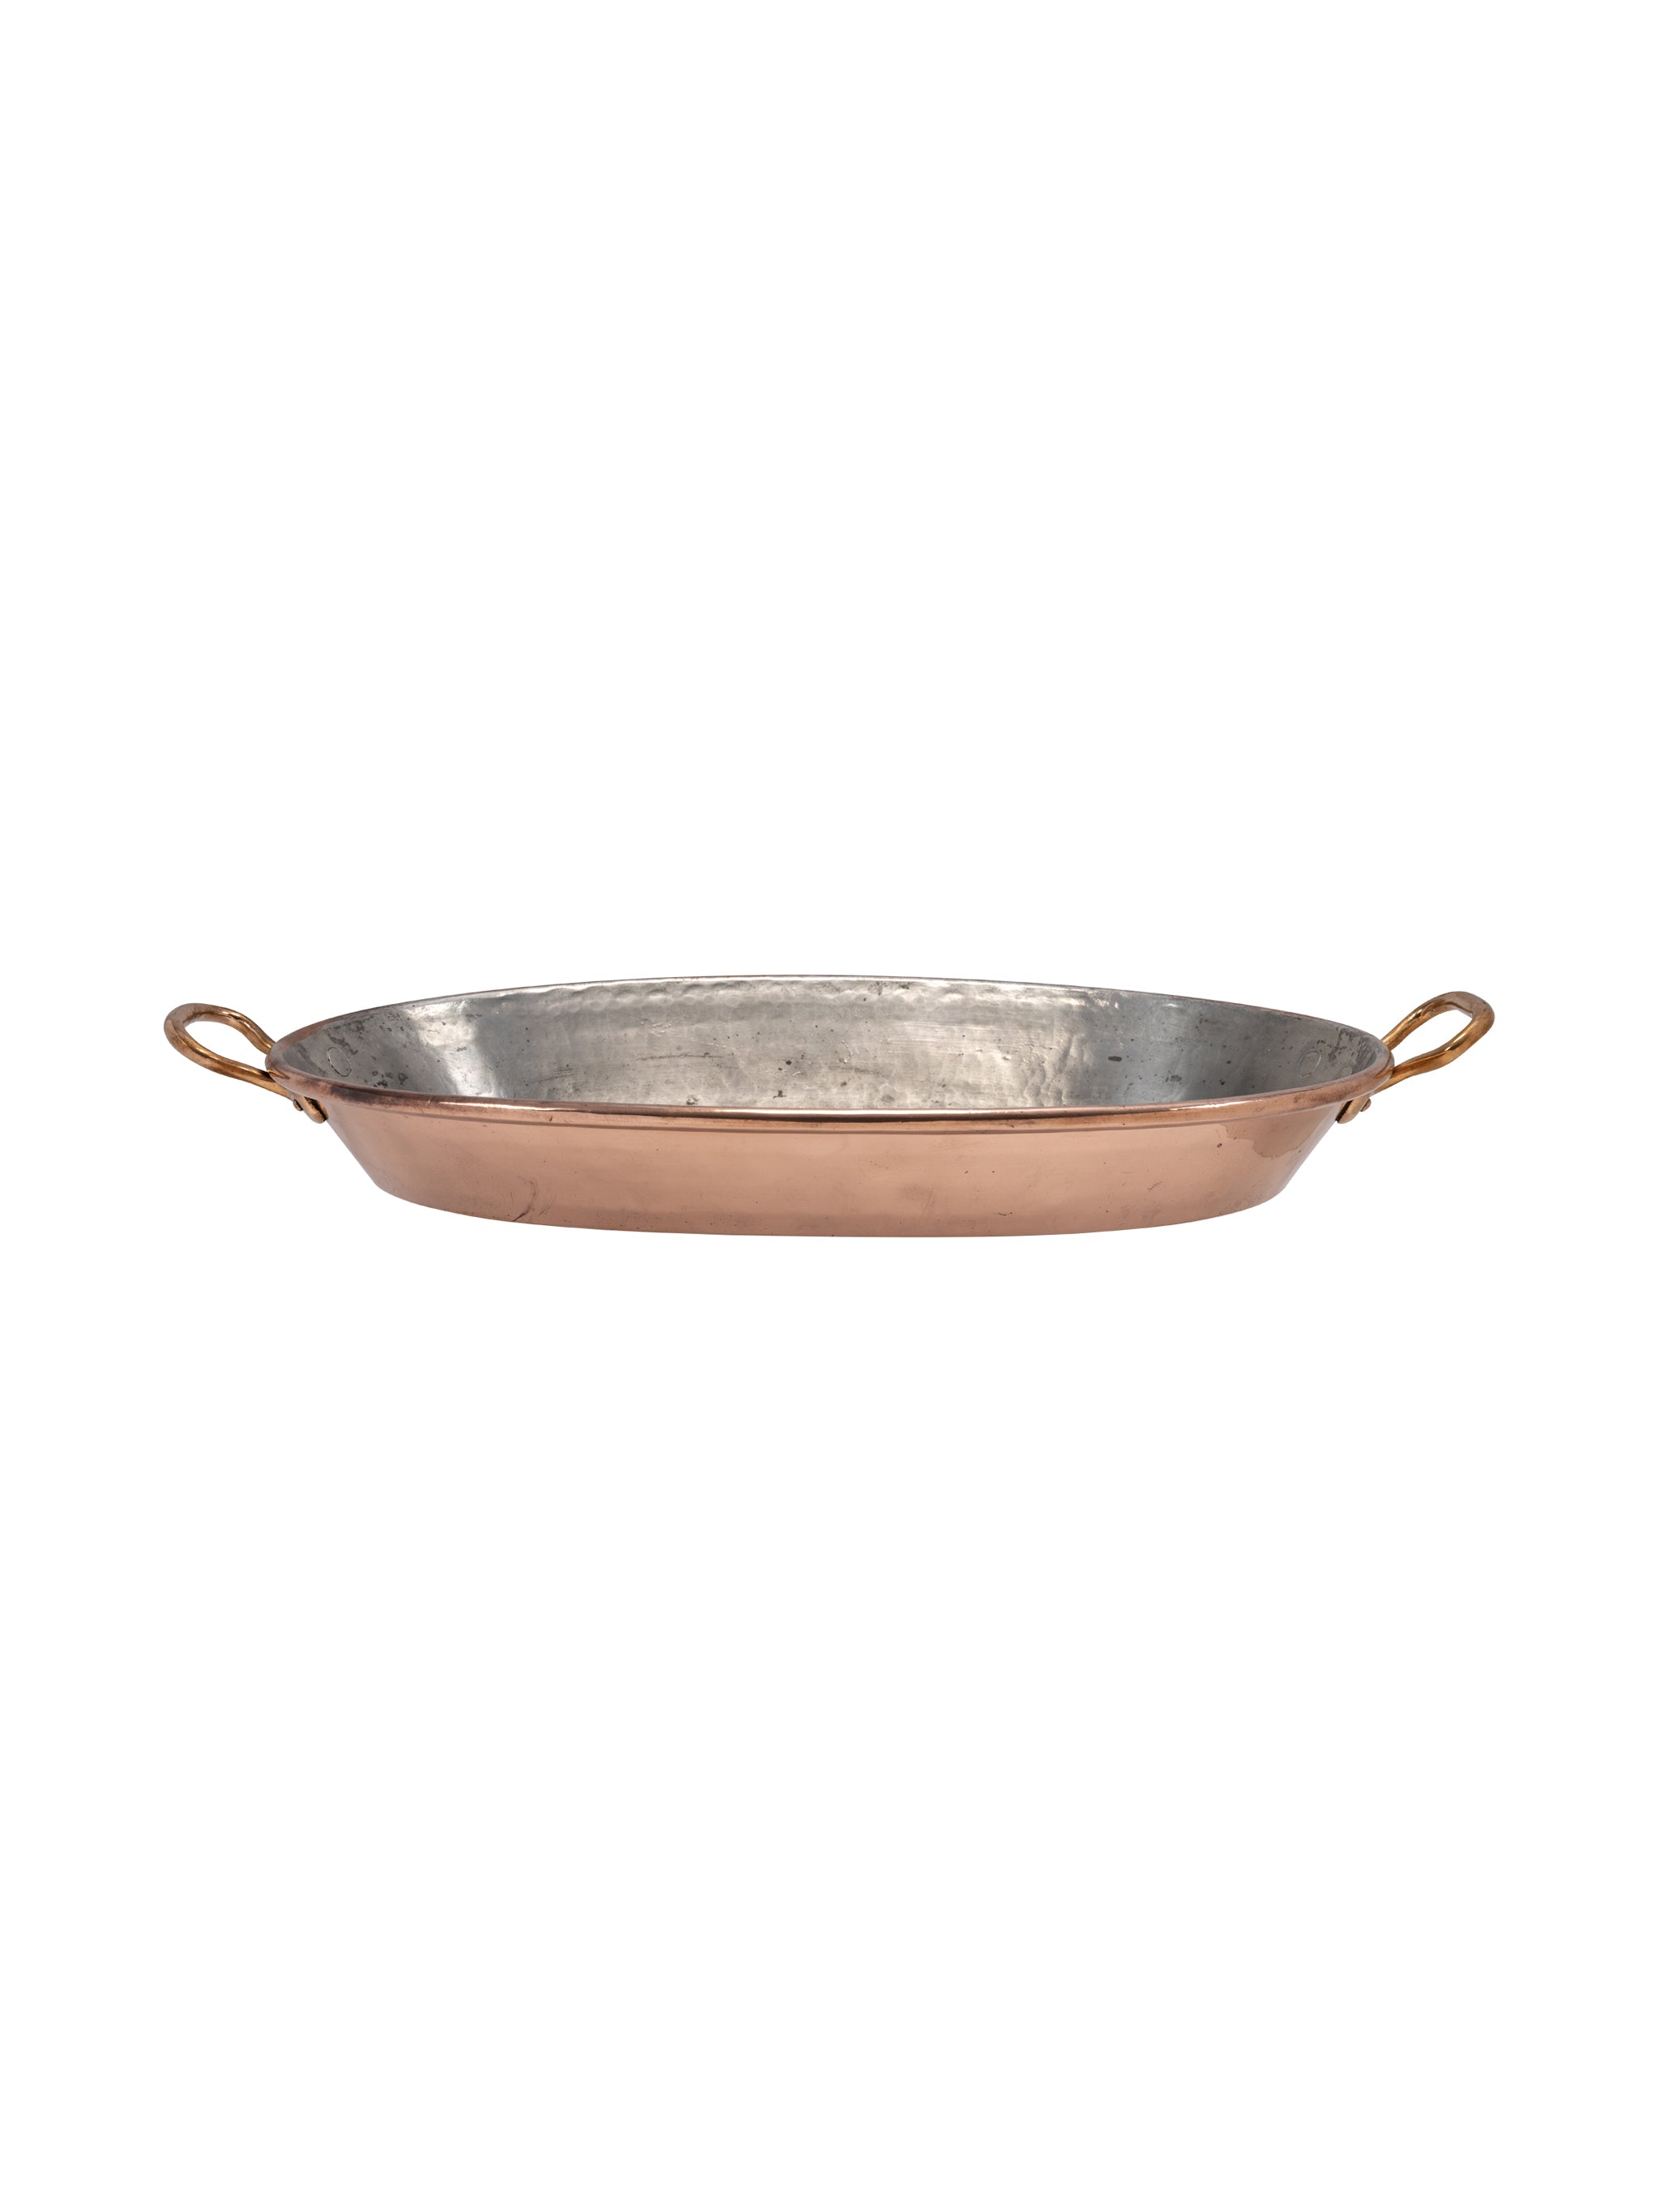 Shop the Smithey Cast-Iron Double-Handled Skillet at Weston Table